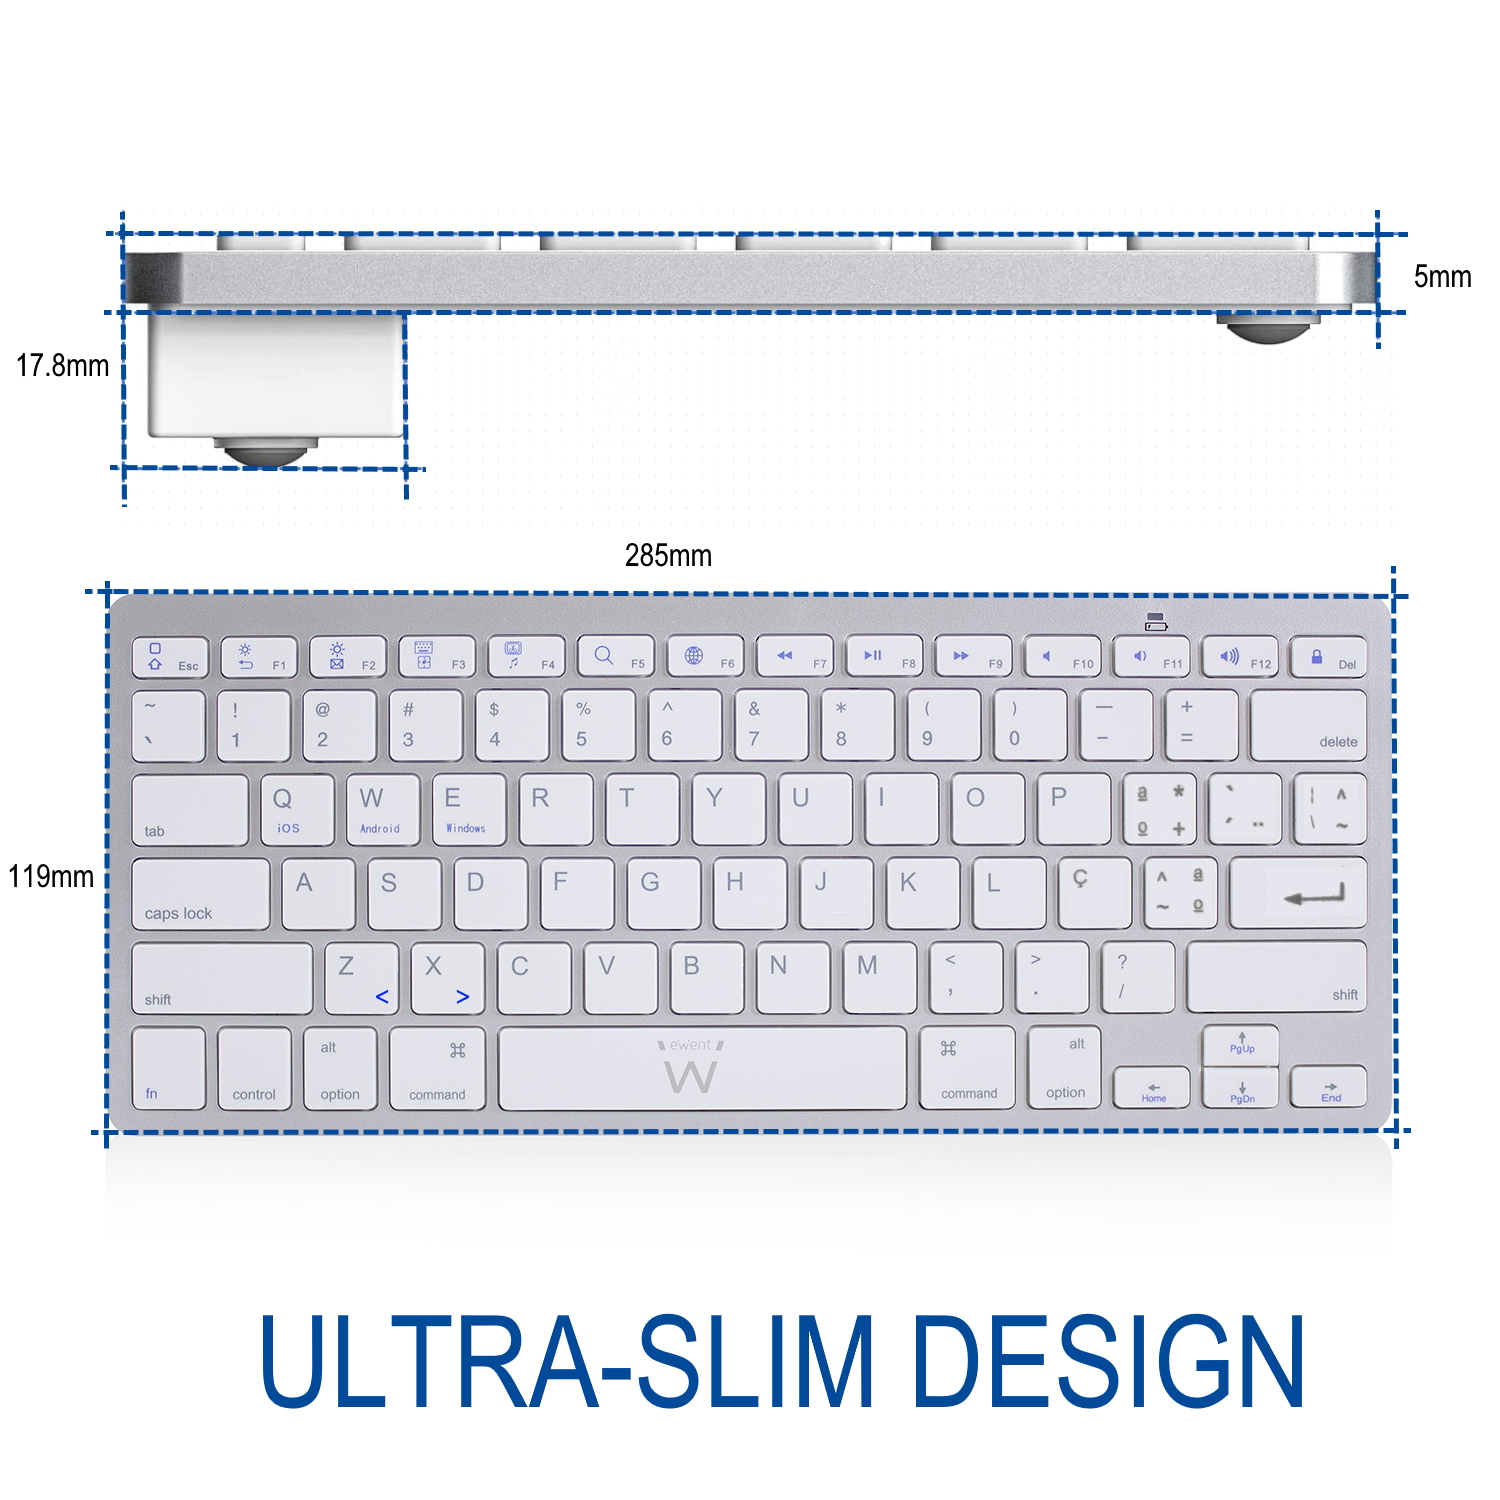 alledaags Snazzy metaal Ultra-slim Bluetooth Keyboard - PT layout (QWERTY) | Ewent Eminent